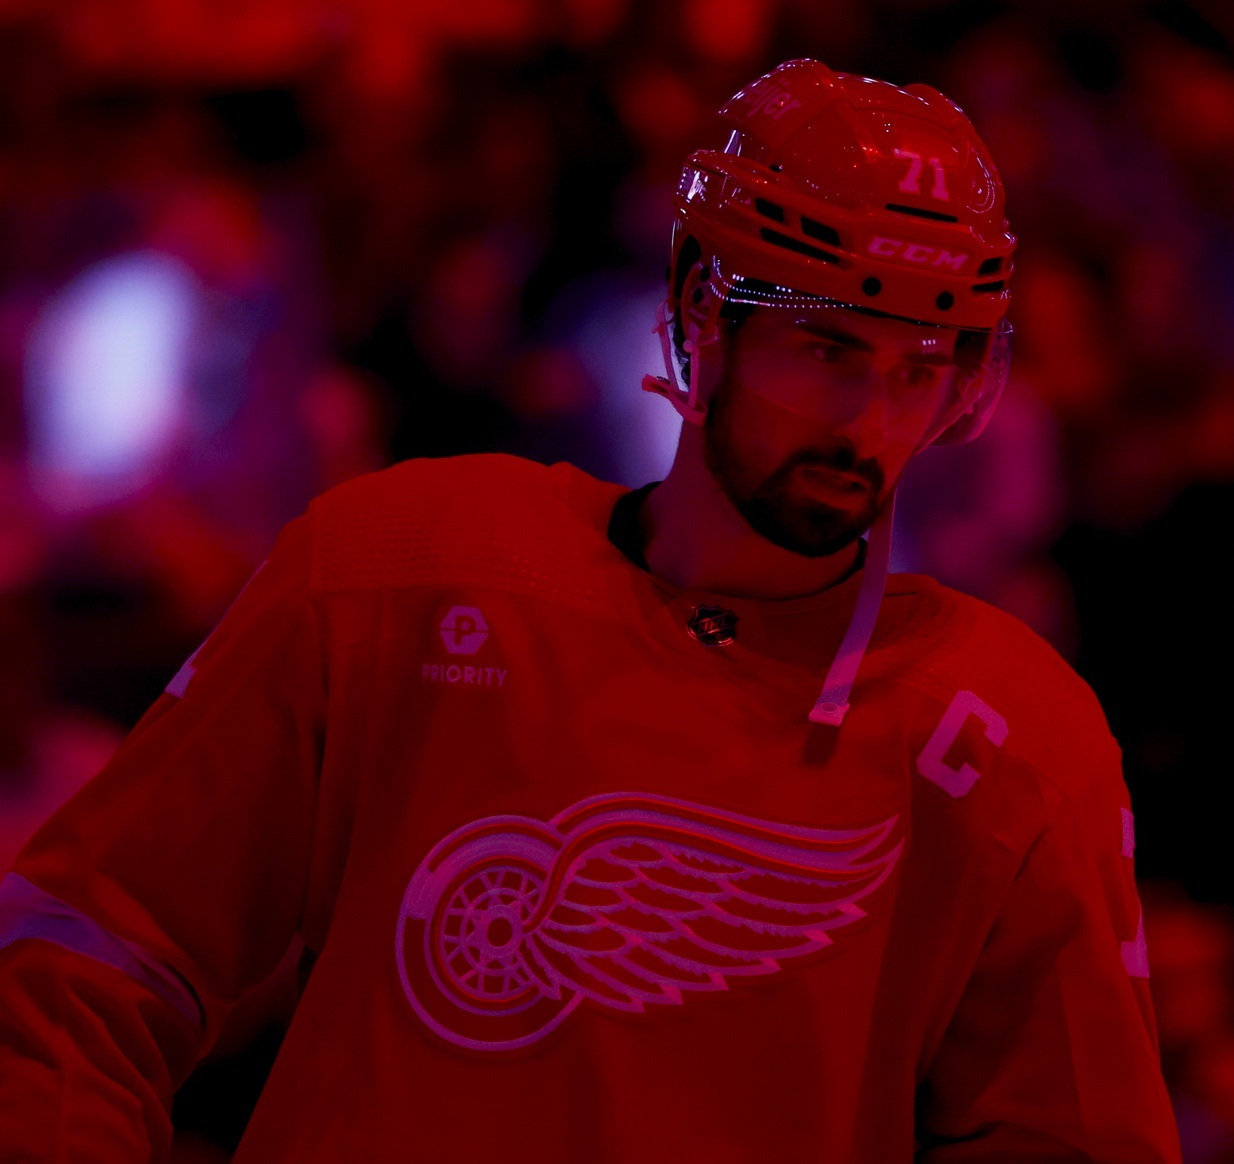 Heartbreak in Hockeytown — Will the Red Wings ever return to Stanley Cup winning form?